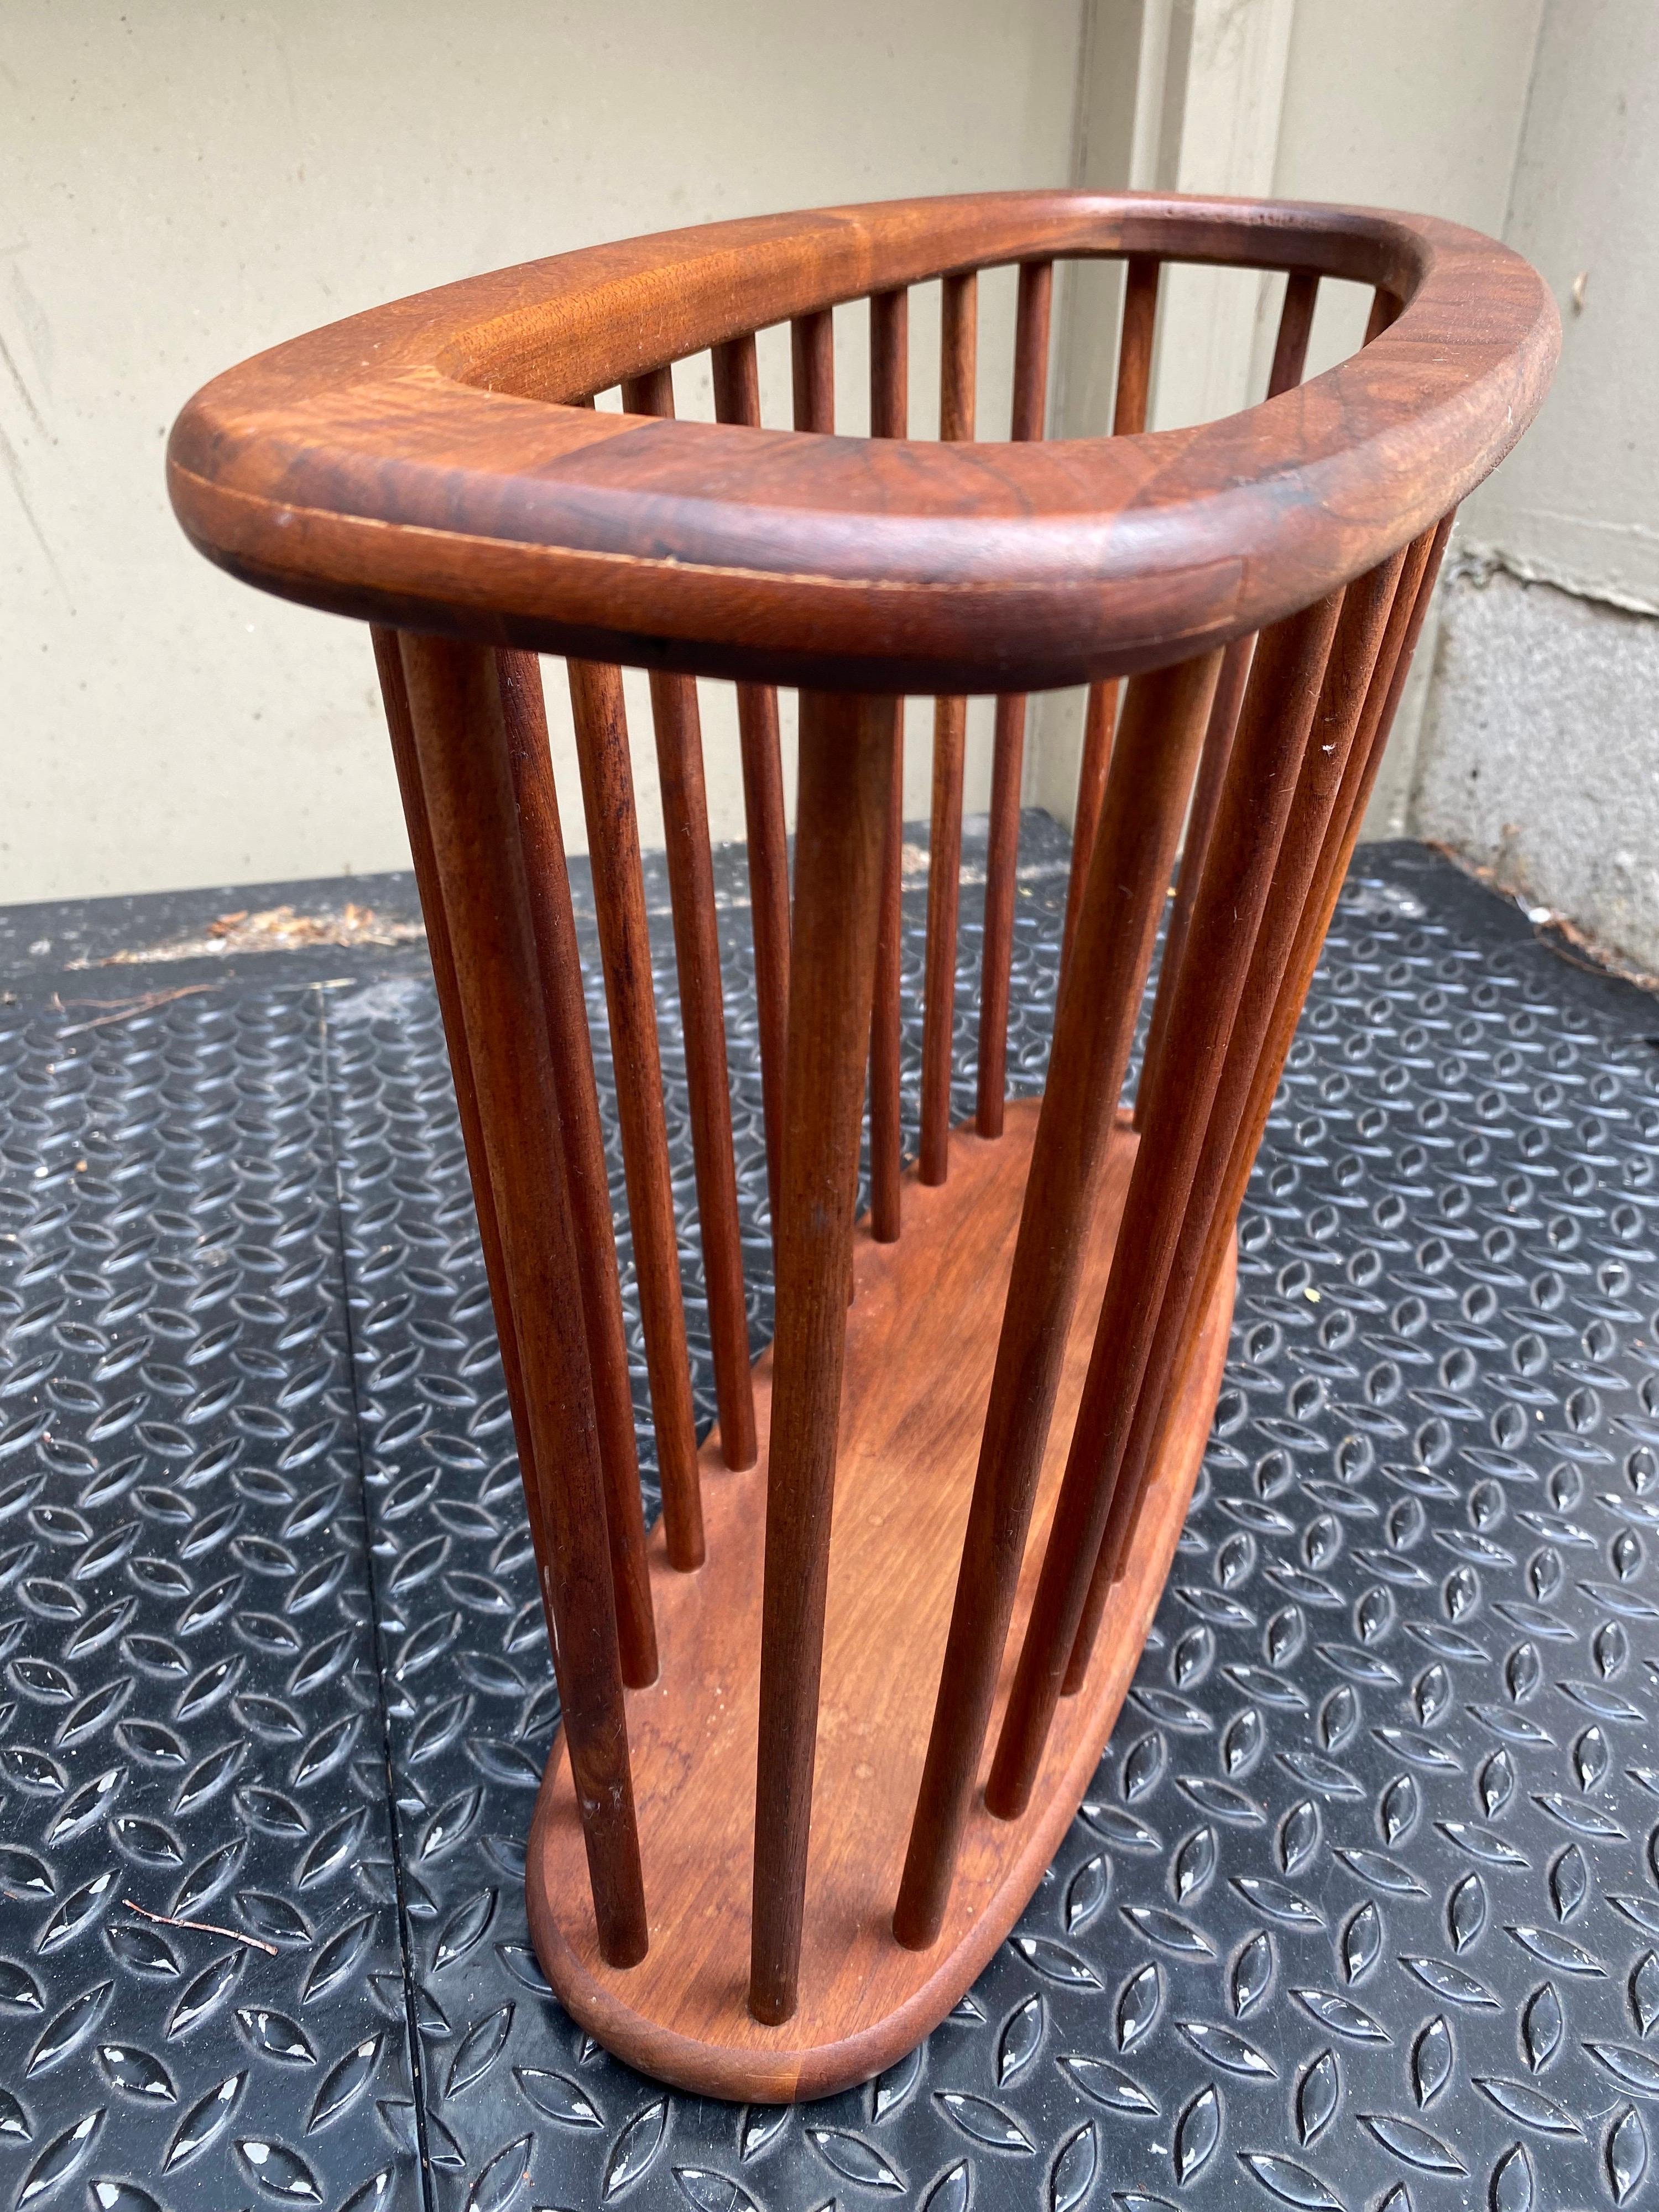 Arthur Umanoff walnut magazine rack or holder. Made up of dowels with a oval open top and solid bottom.